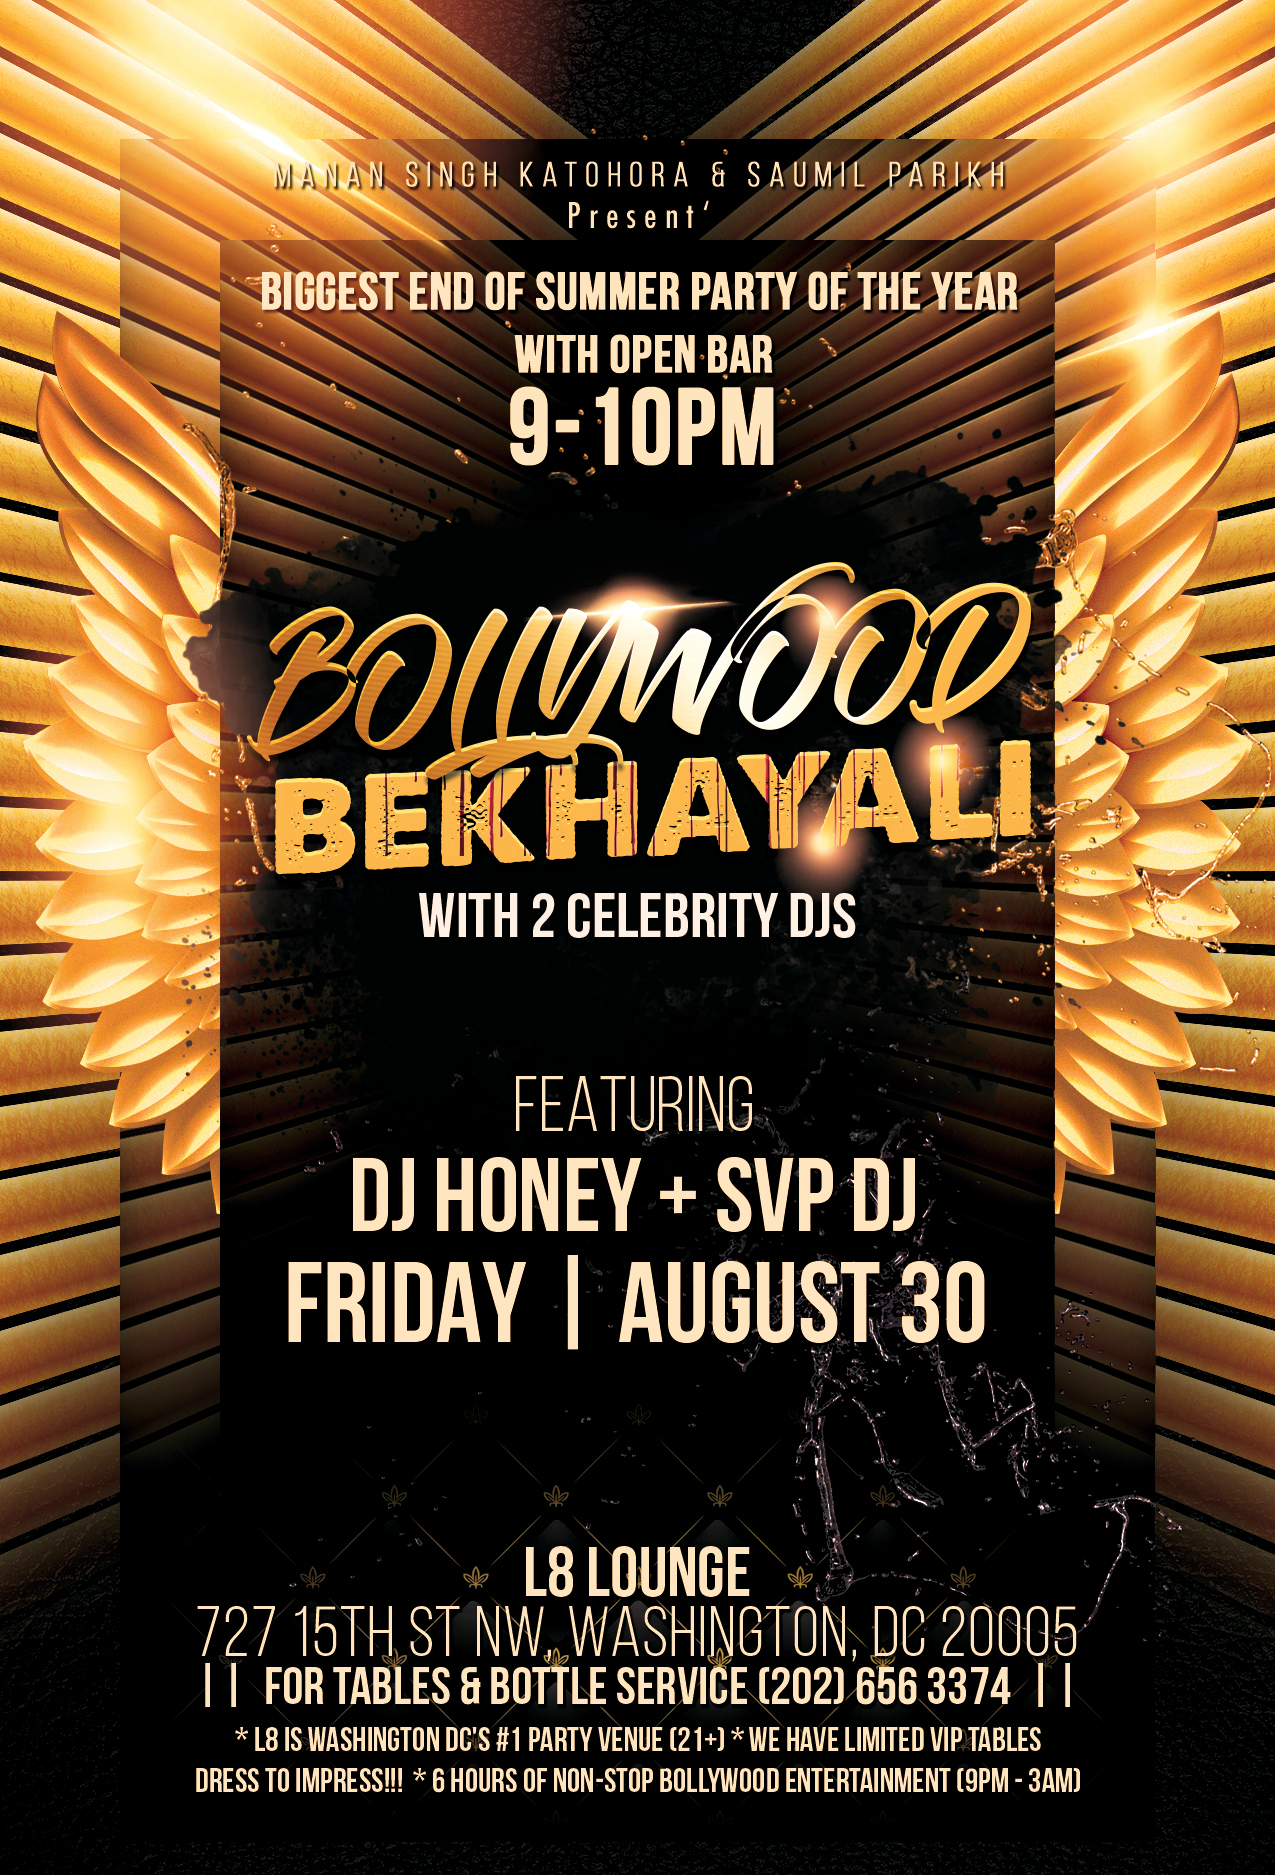 "BOLLYWOOD BEKHAYALI"  with  2 CELEBRITY DJs  and  OPEN BAR  =  Biggest END OF SUMMER Party!!!